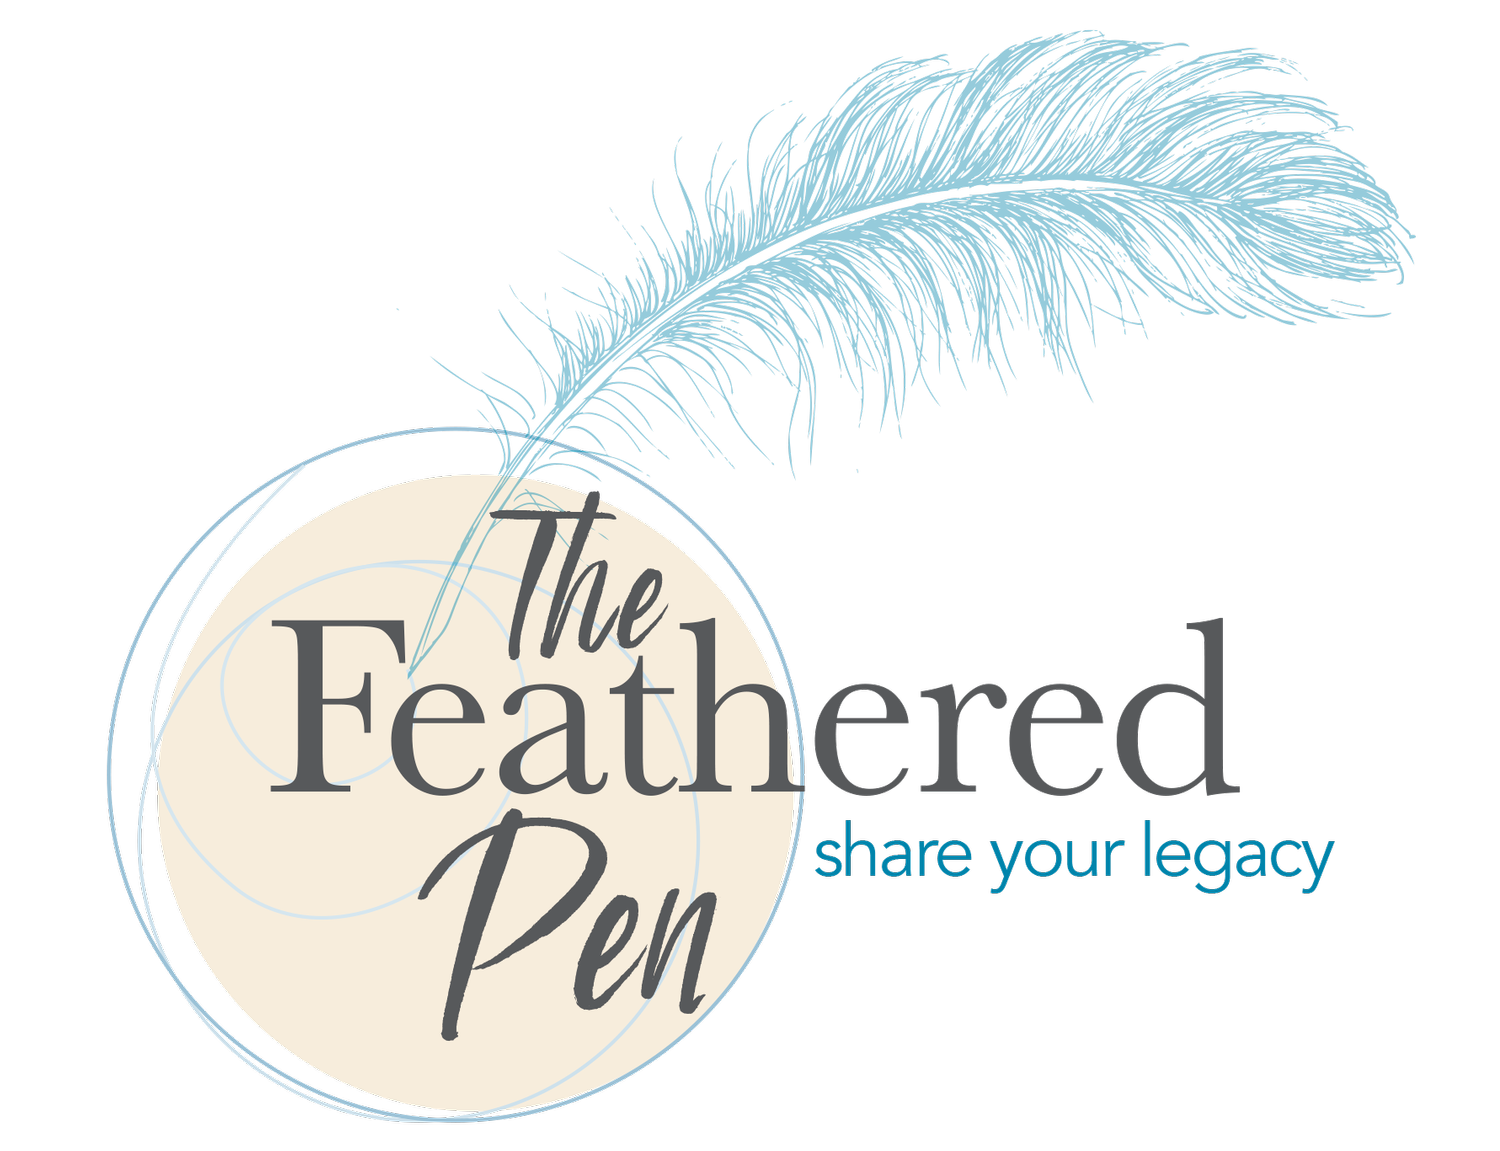 The Feathered Pen